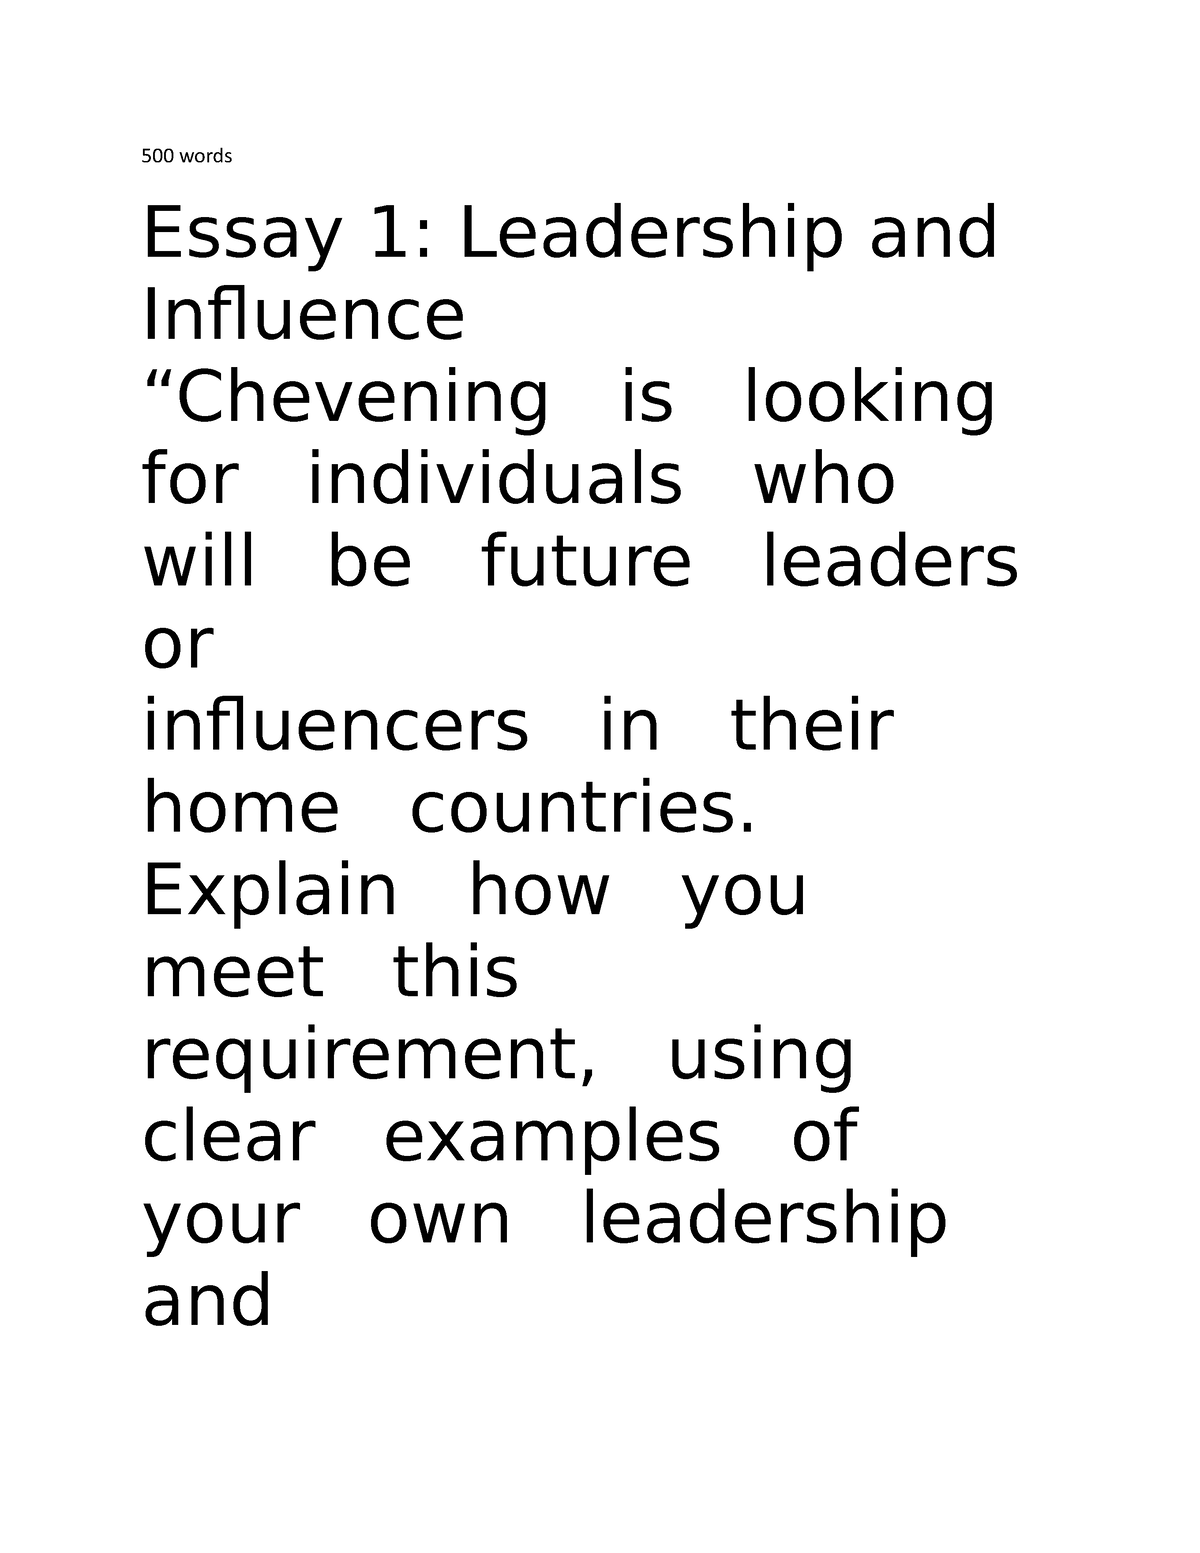 leadership and influence essay for chevening scholarship pdf